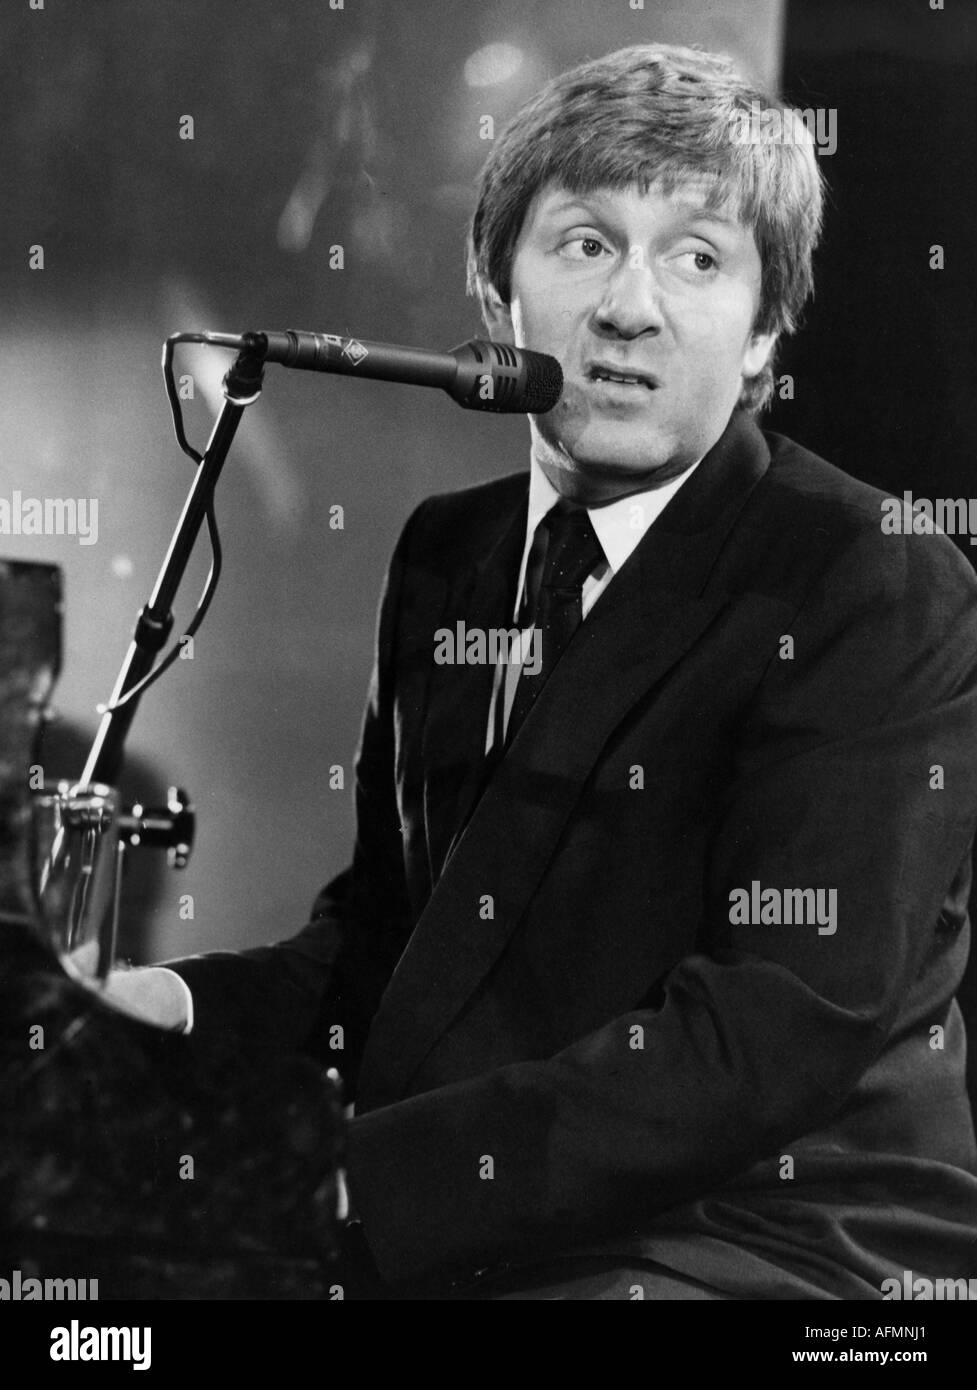 Sulke, Stephan, * 27.12.1943, German singer and composer, (pop music), half length, during performance, playing piano, 1983, Stock Photo